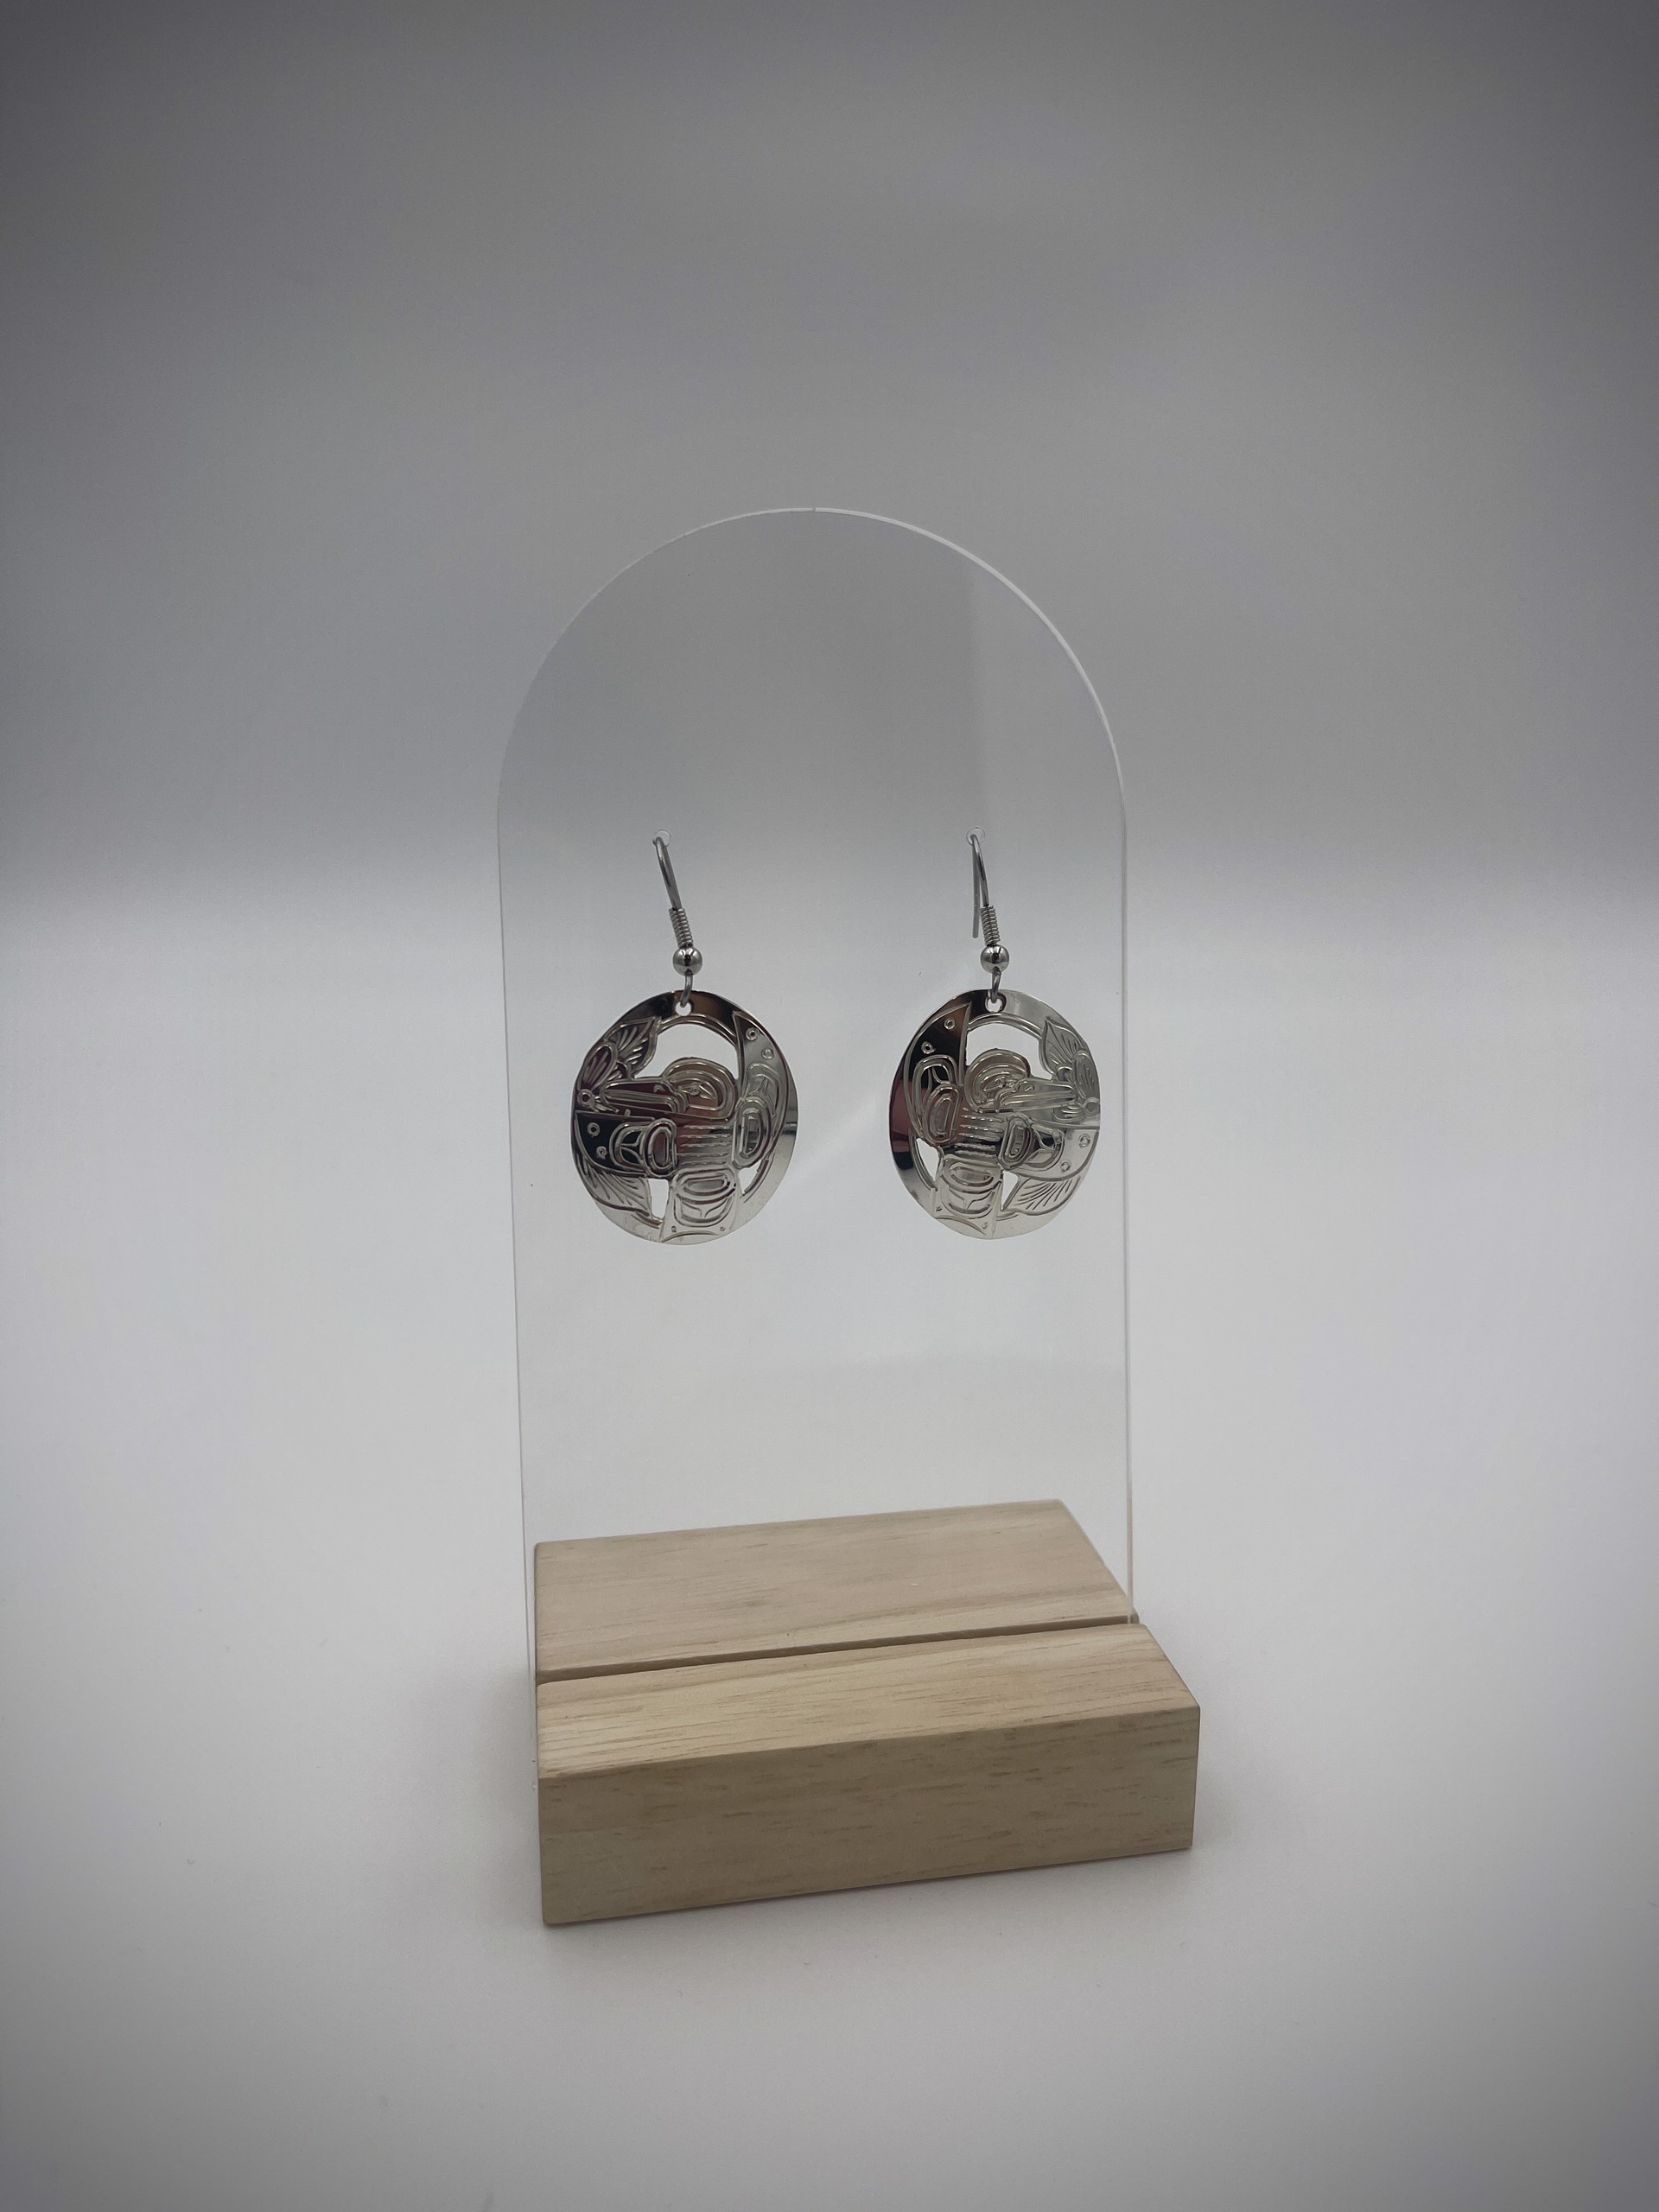 Silver Earrings by William Cook